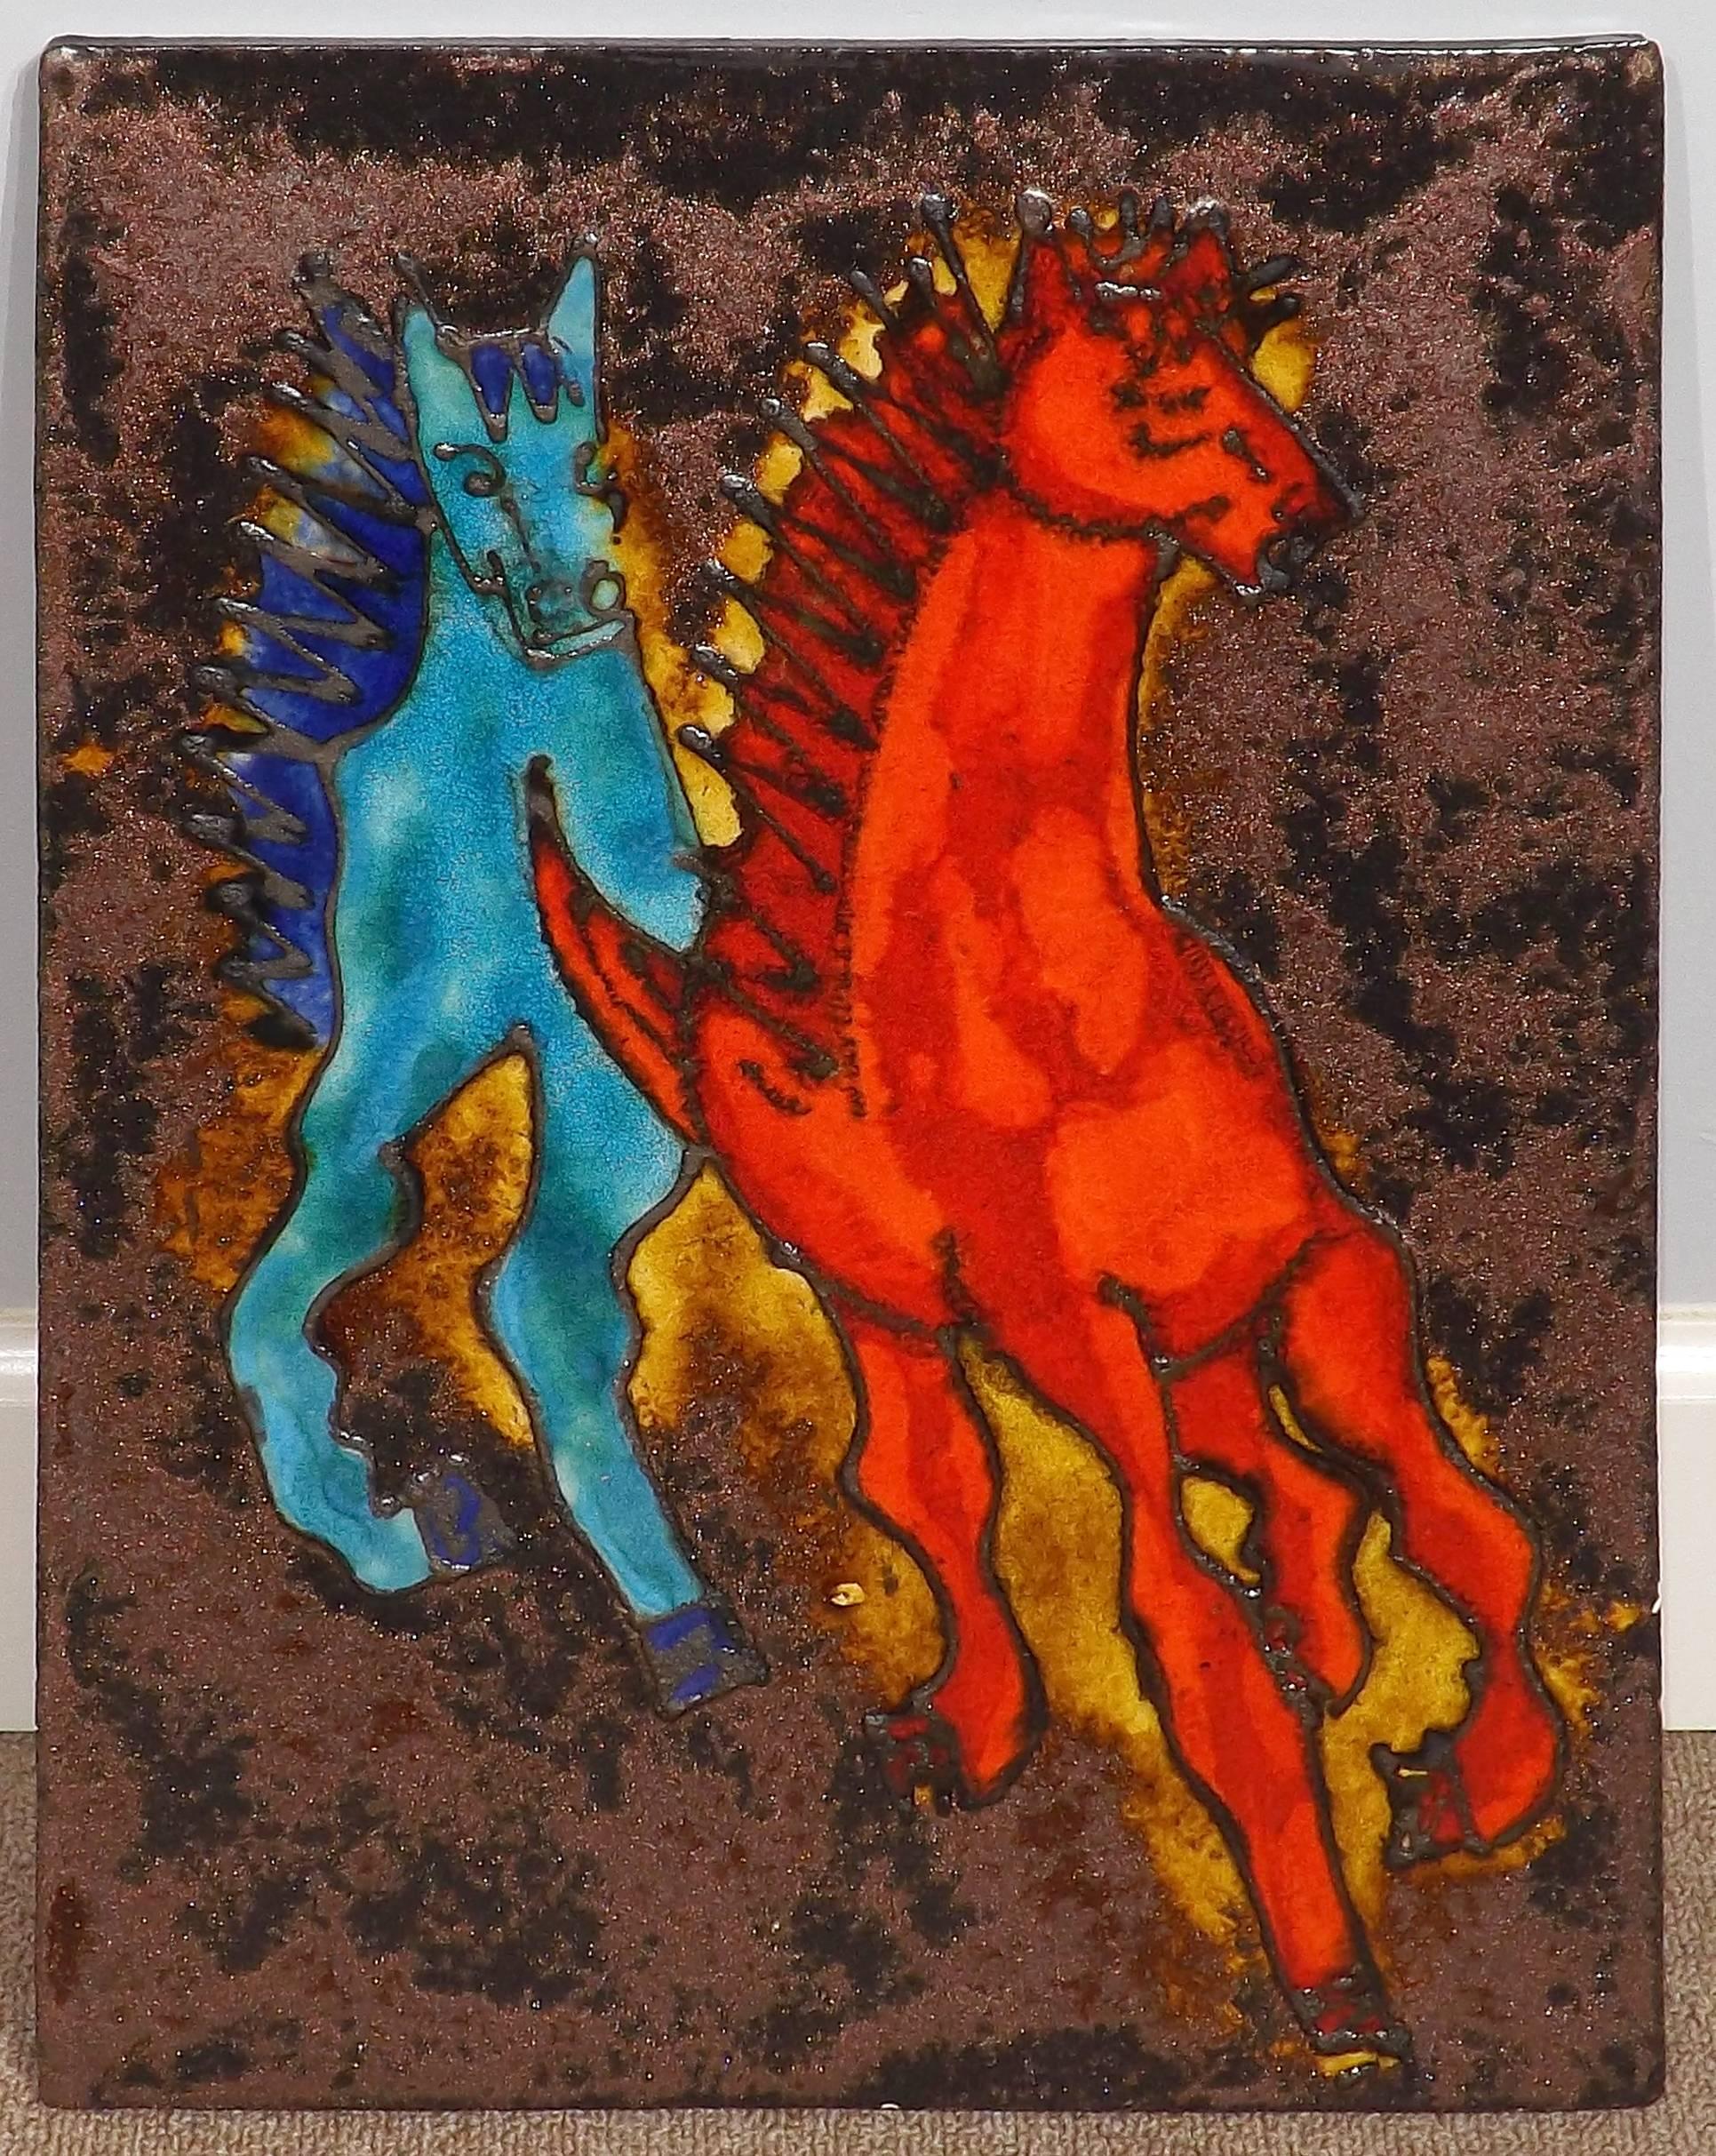 A magnificent hand-painted tile with two galloping horses by the German ceramic firm Ruscha. Both of the figures are boldly represented in bright colors on a metallic sheen background. Marked 'Ruscha Handgemalt' (hand-painted) verso.